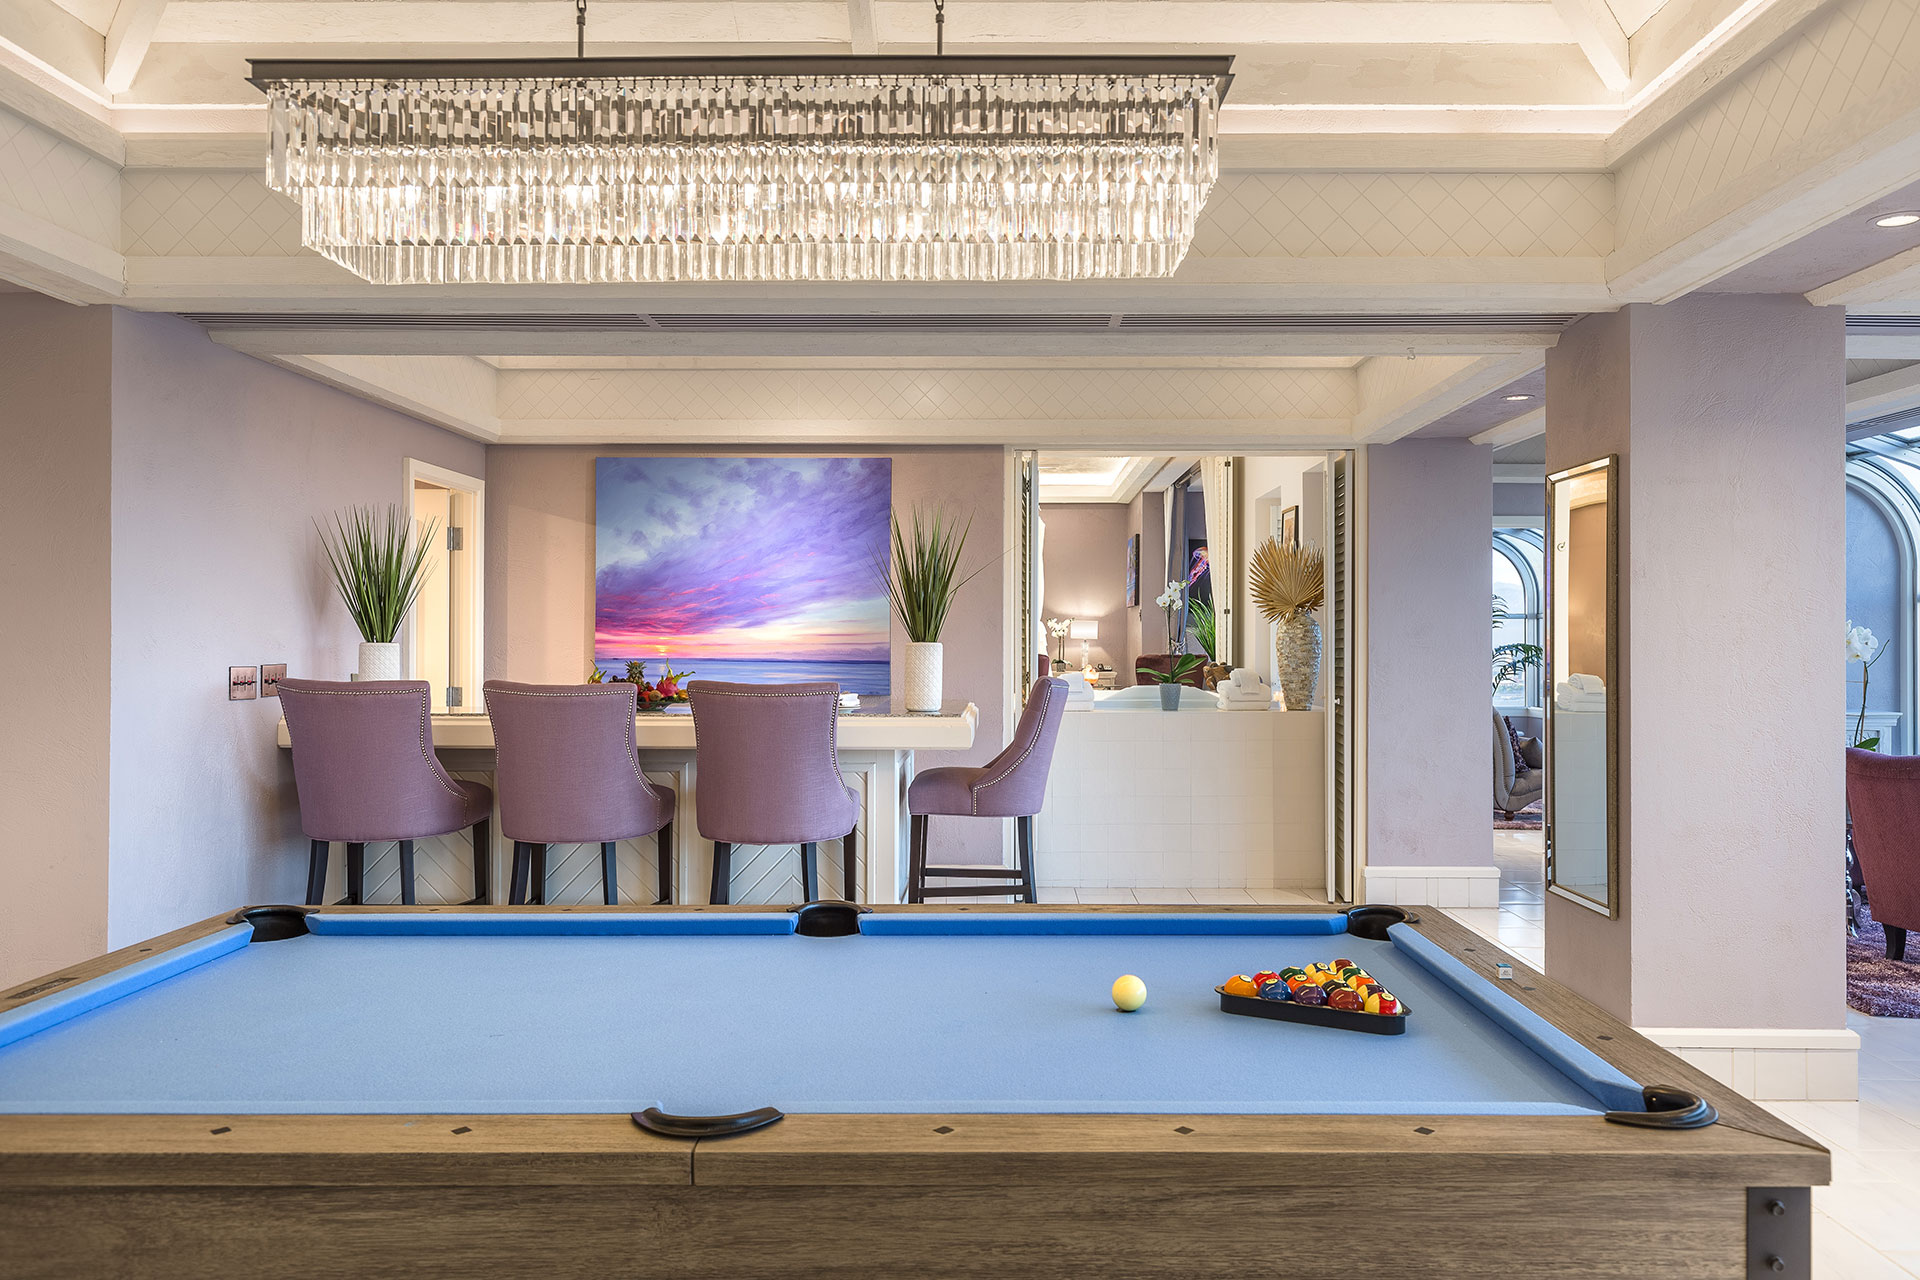 Custom Las Vegas Guest Suite with a Blue Pool table in the foreground, lavender-colored bartools surrounding a bar behind and a wide crystal chandelier above.